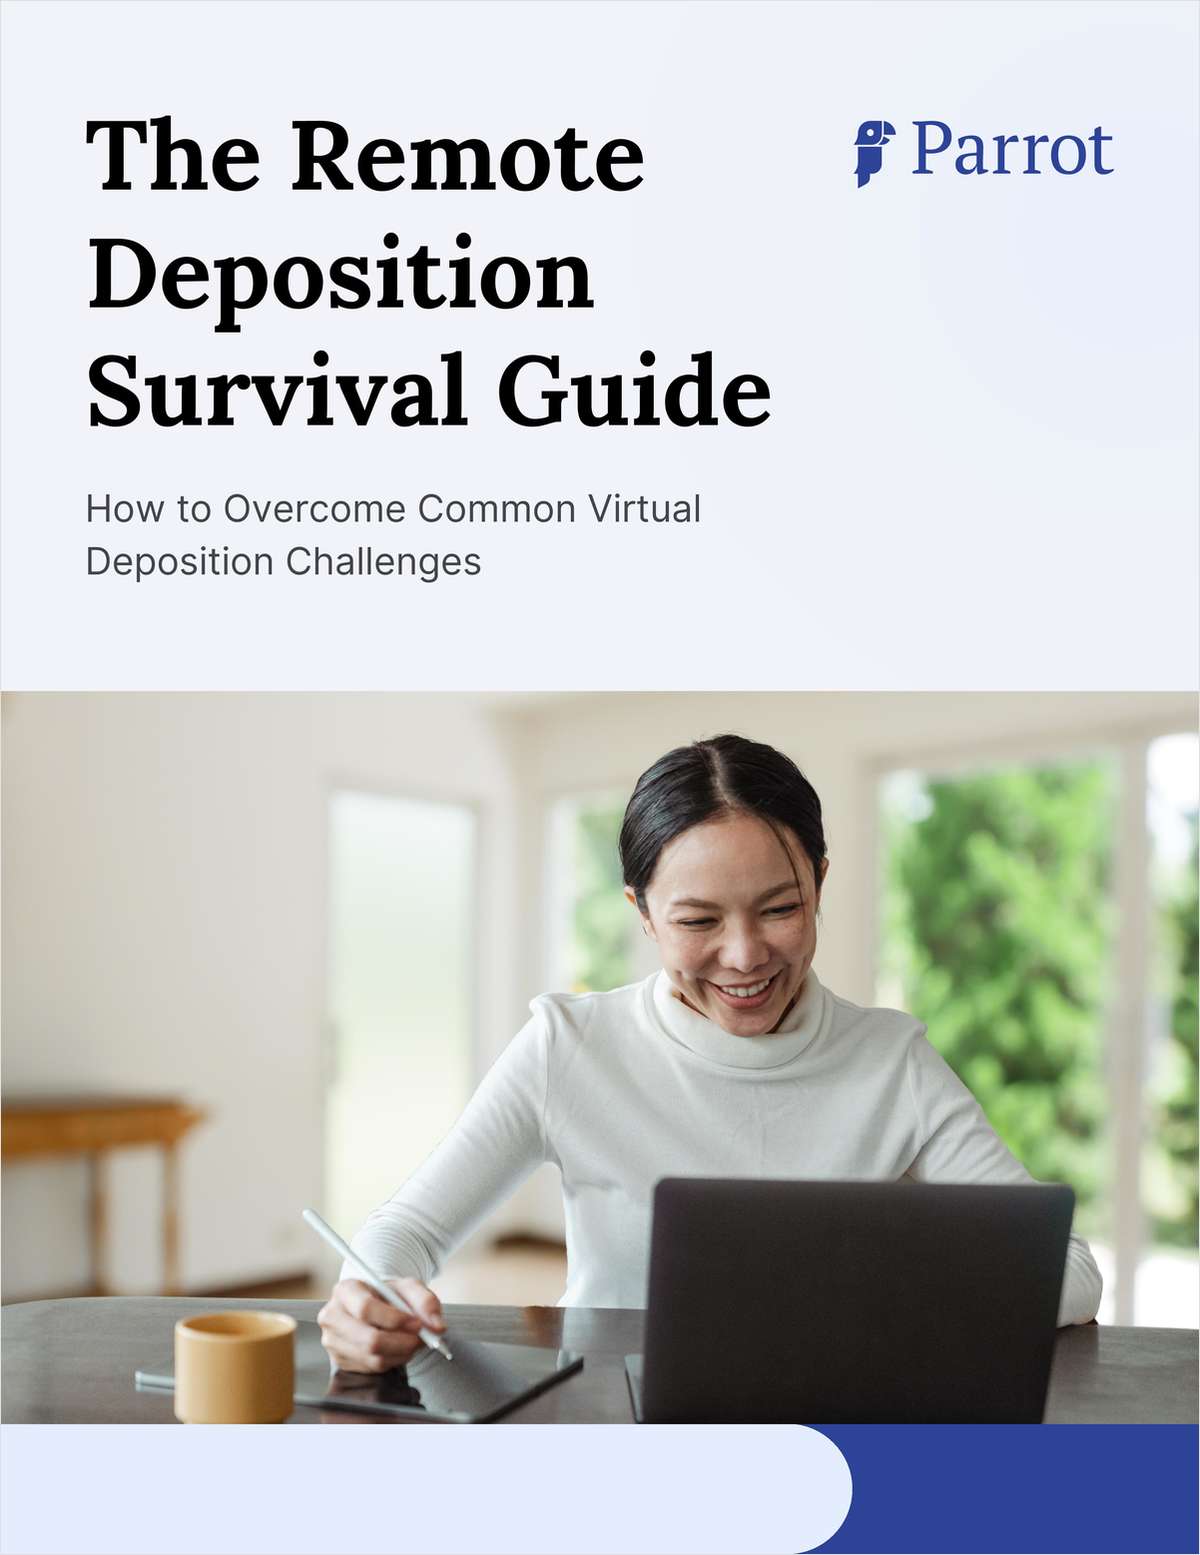 While remote depositions have benefits, they also introduce new challenges around security and collaboration. This guide covers best practices, tips and solutions across all aspects of deposition preparation, execution, and follow-up in the virtual setting.